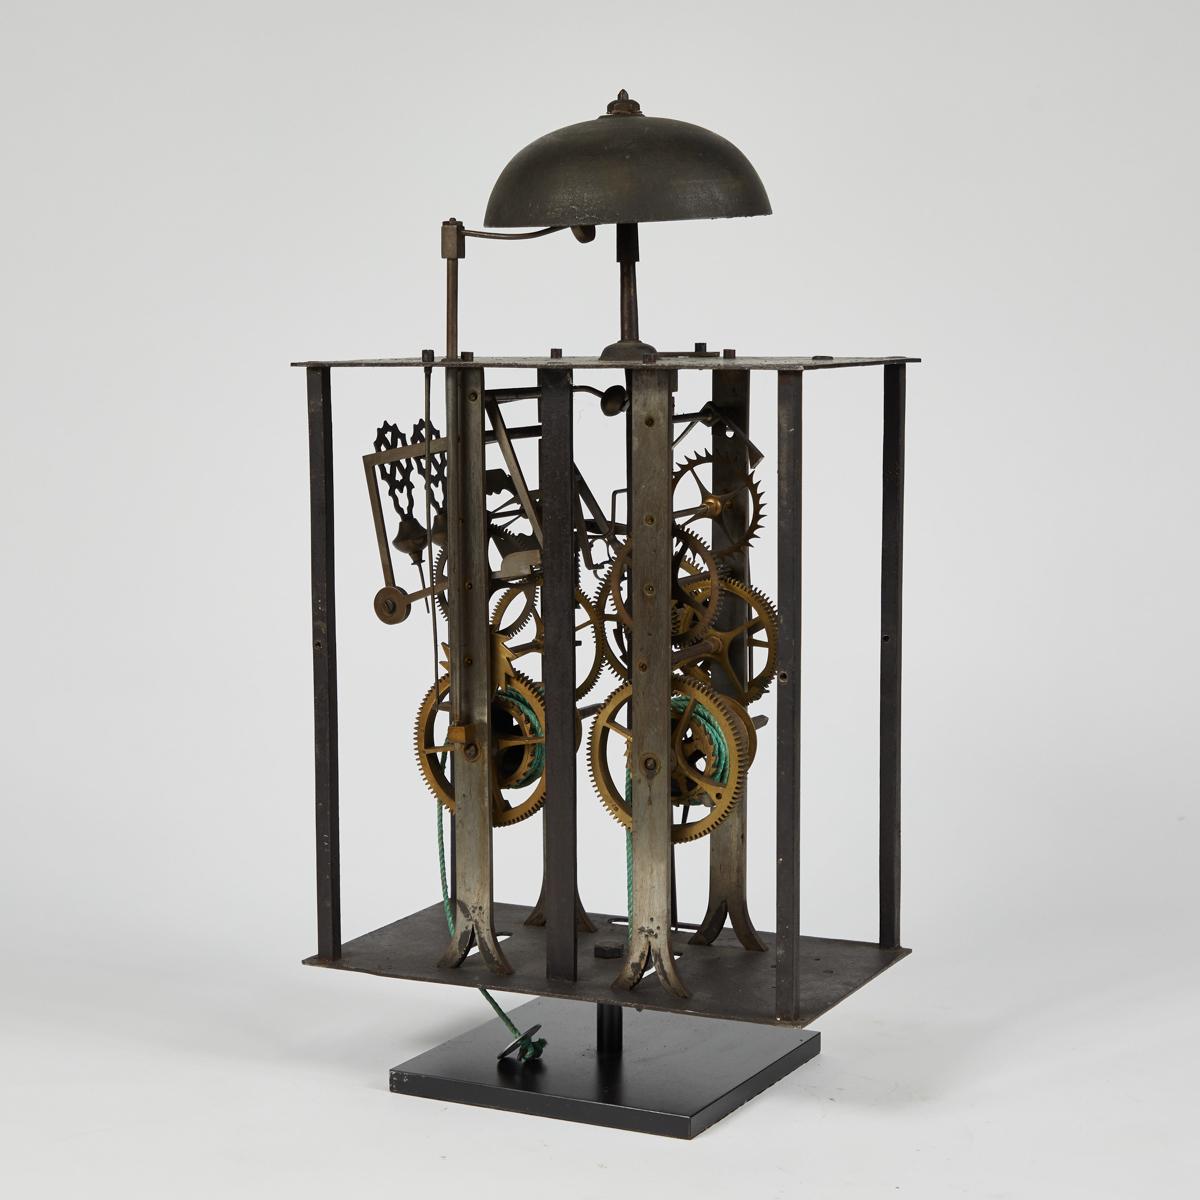 Industrial Clock Works from 19th Century Long Case Clock Mounted on Stand as Sculpture